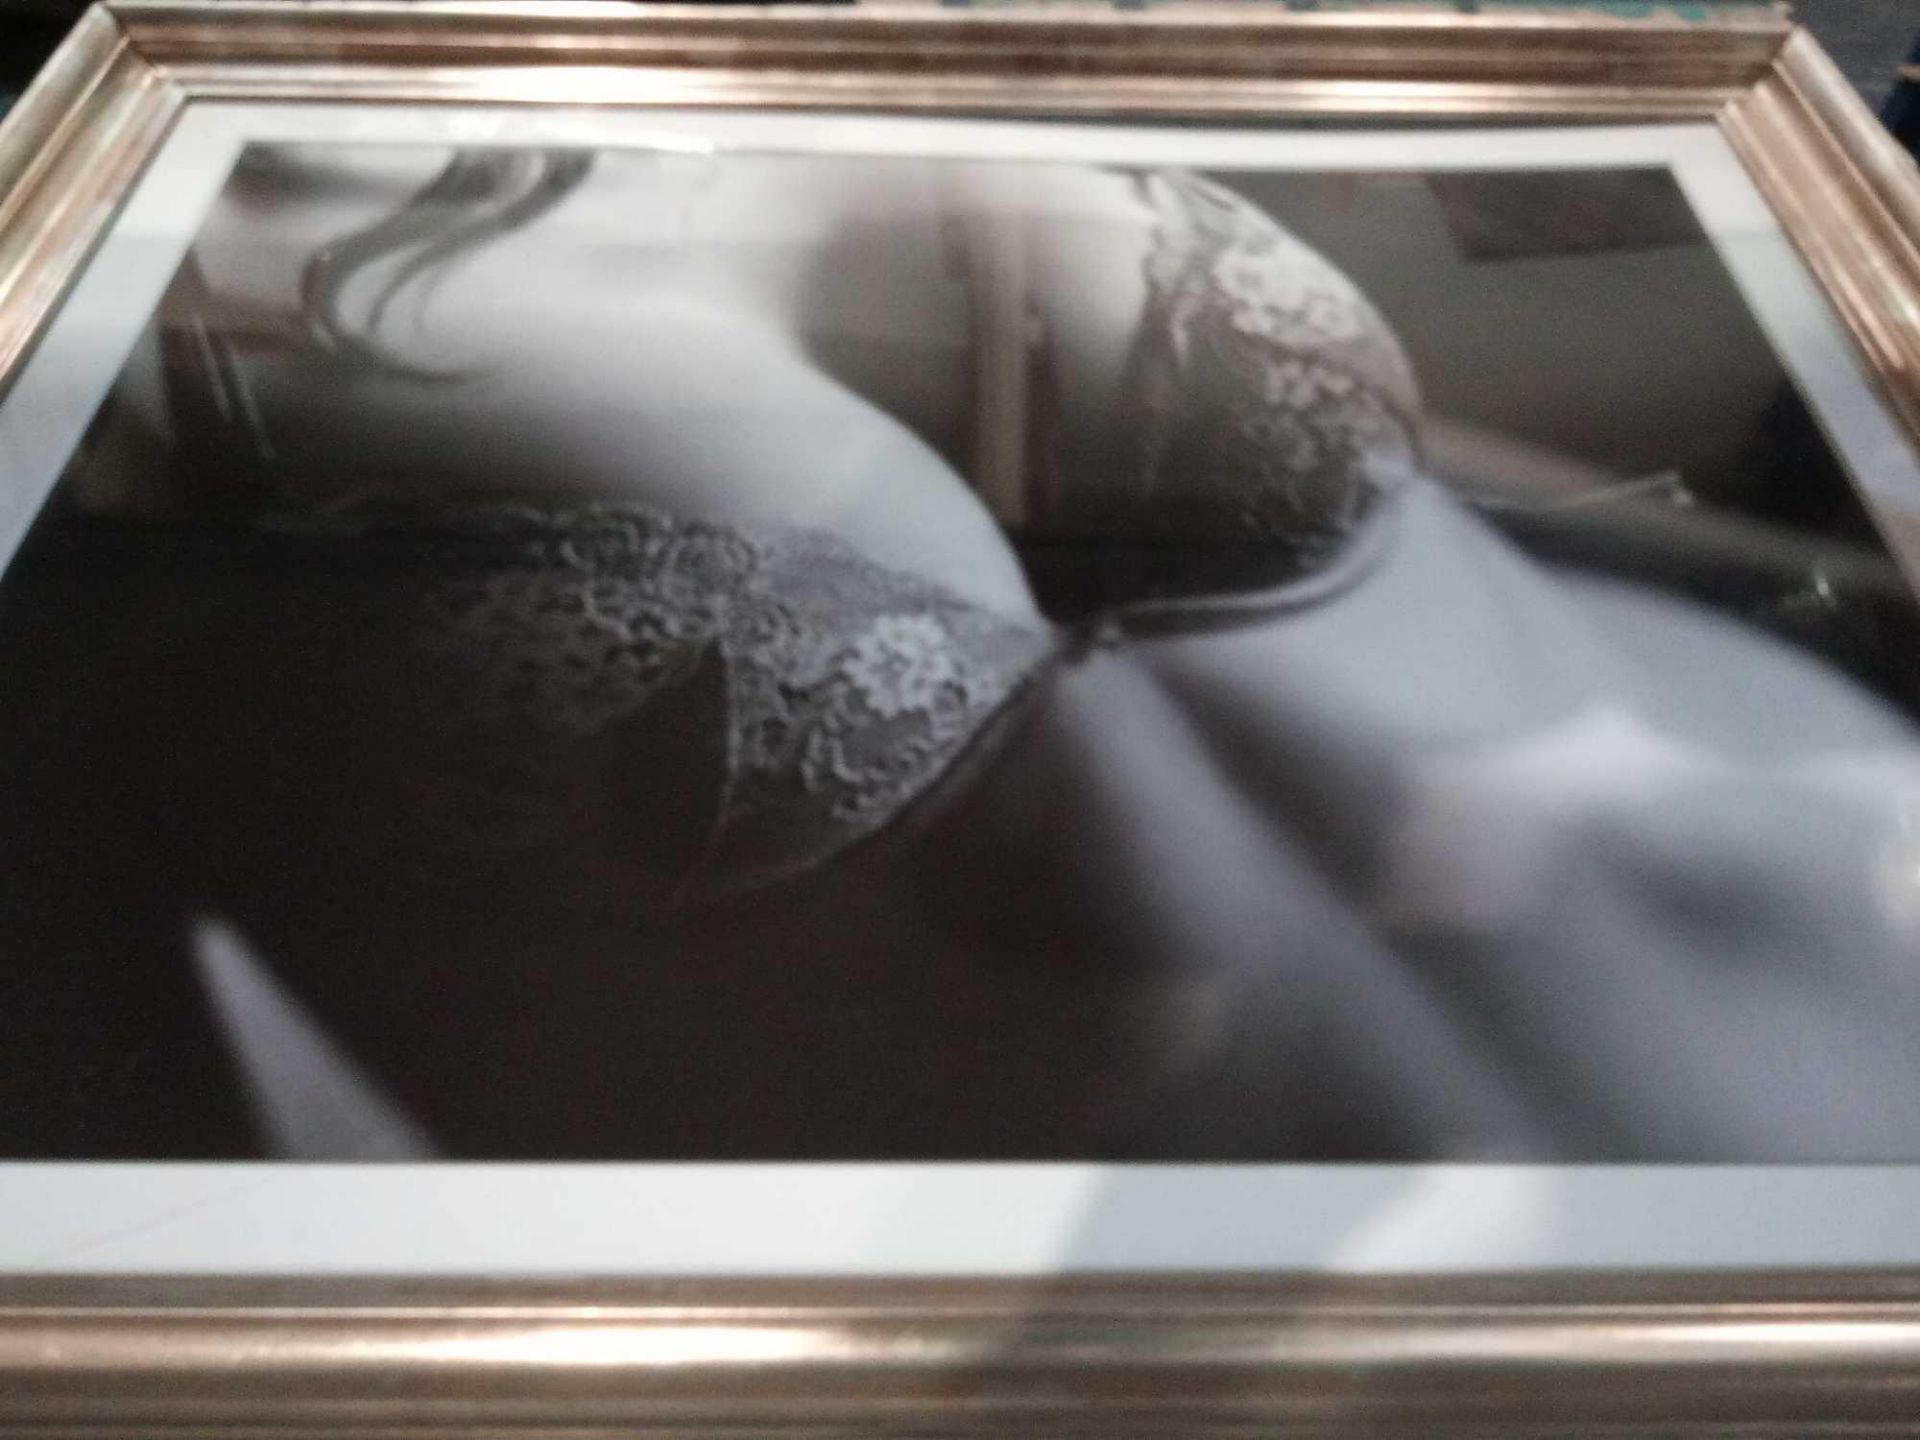 RRP £200 Unboxed Victoria Secret Lingerie Photoshoot Framed Wall Print